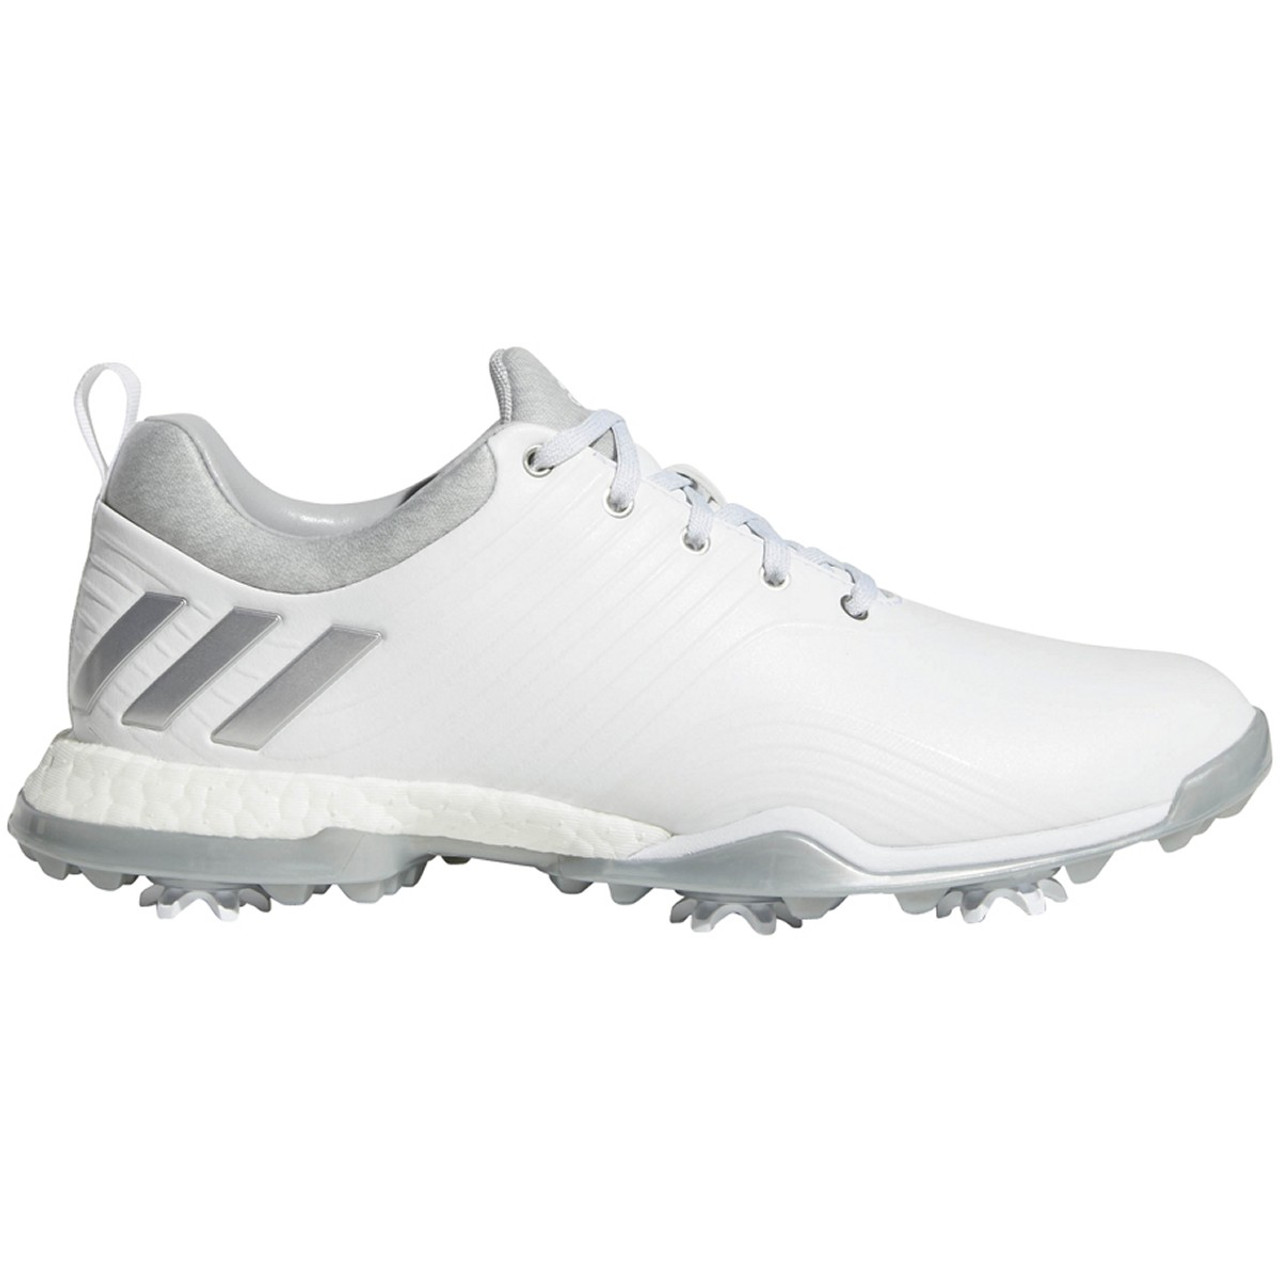 adidas forged golf shoes